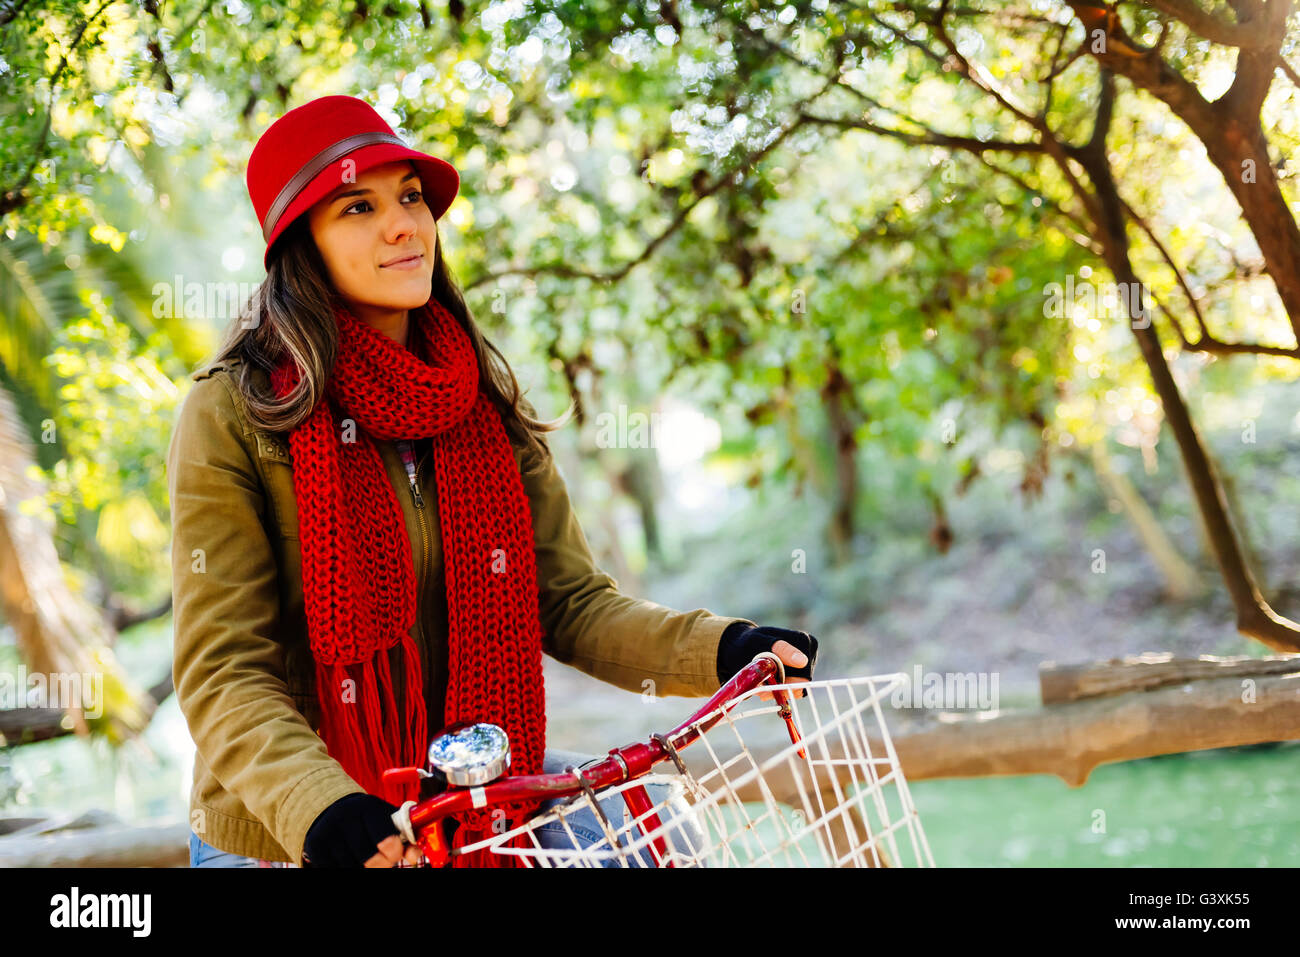 Trendy young woman smiling while riding vintage style bicycle on fall season, colorful nature scenery background. Stock Photo